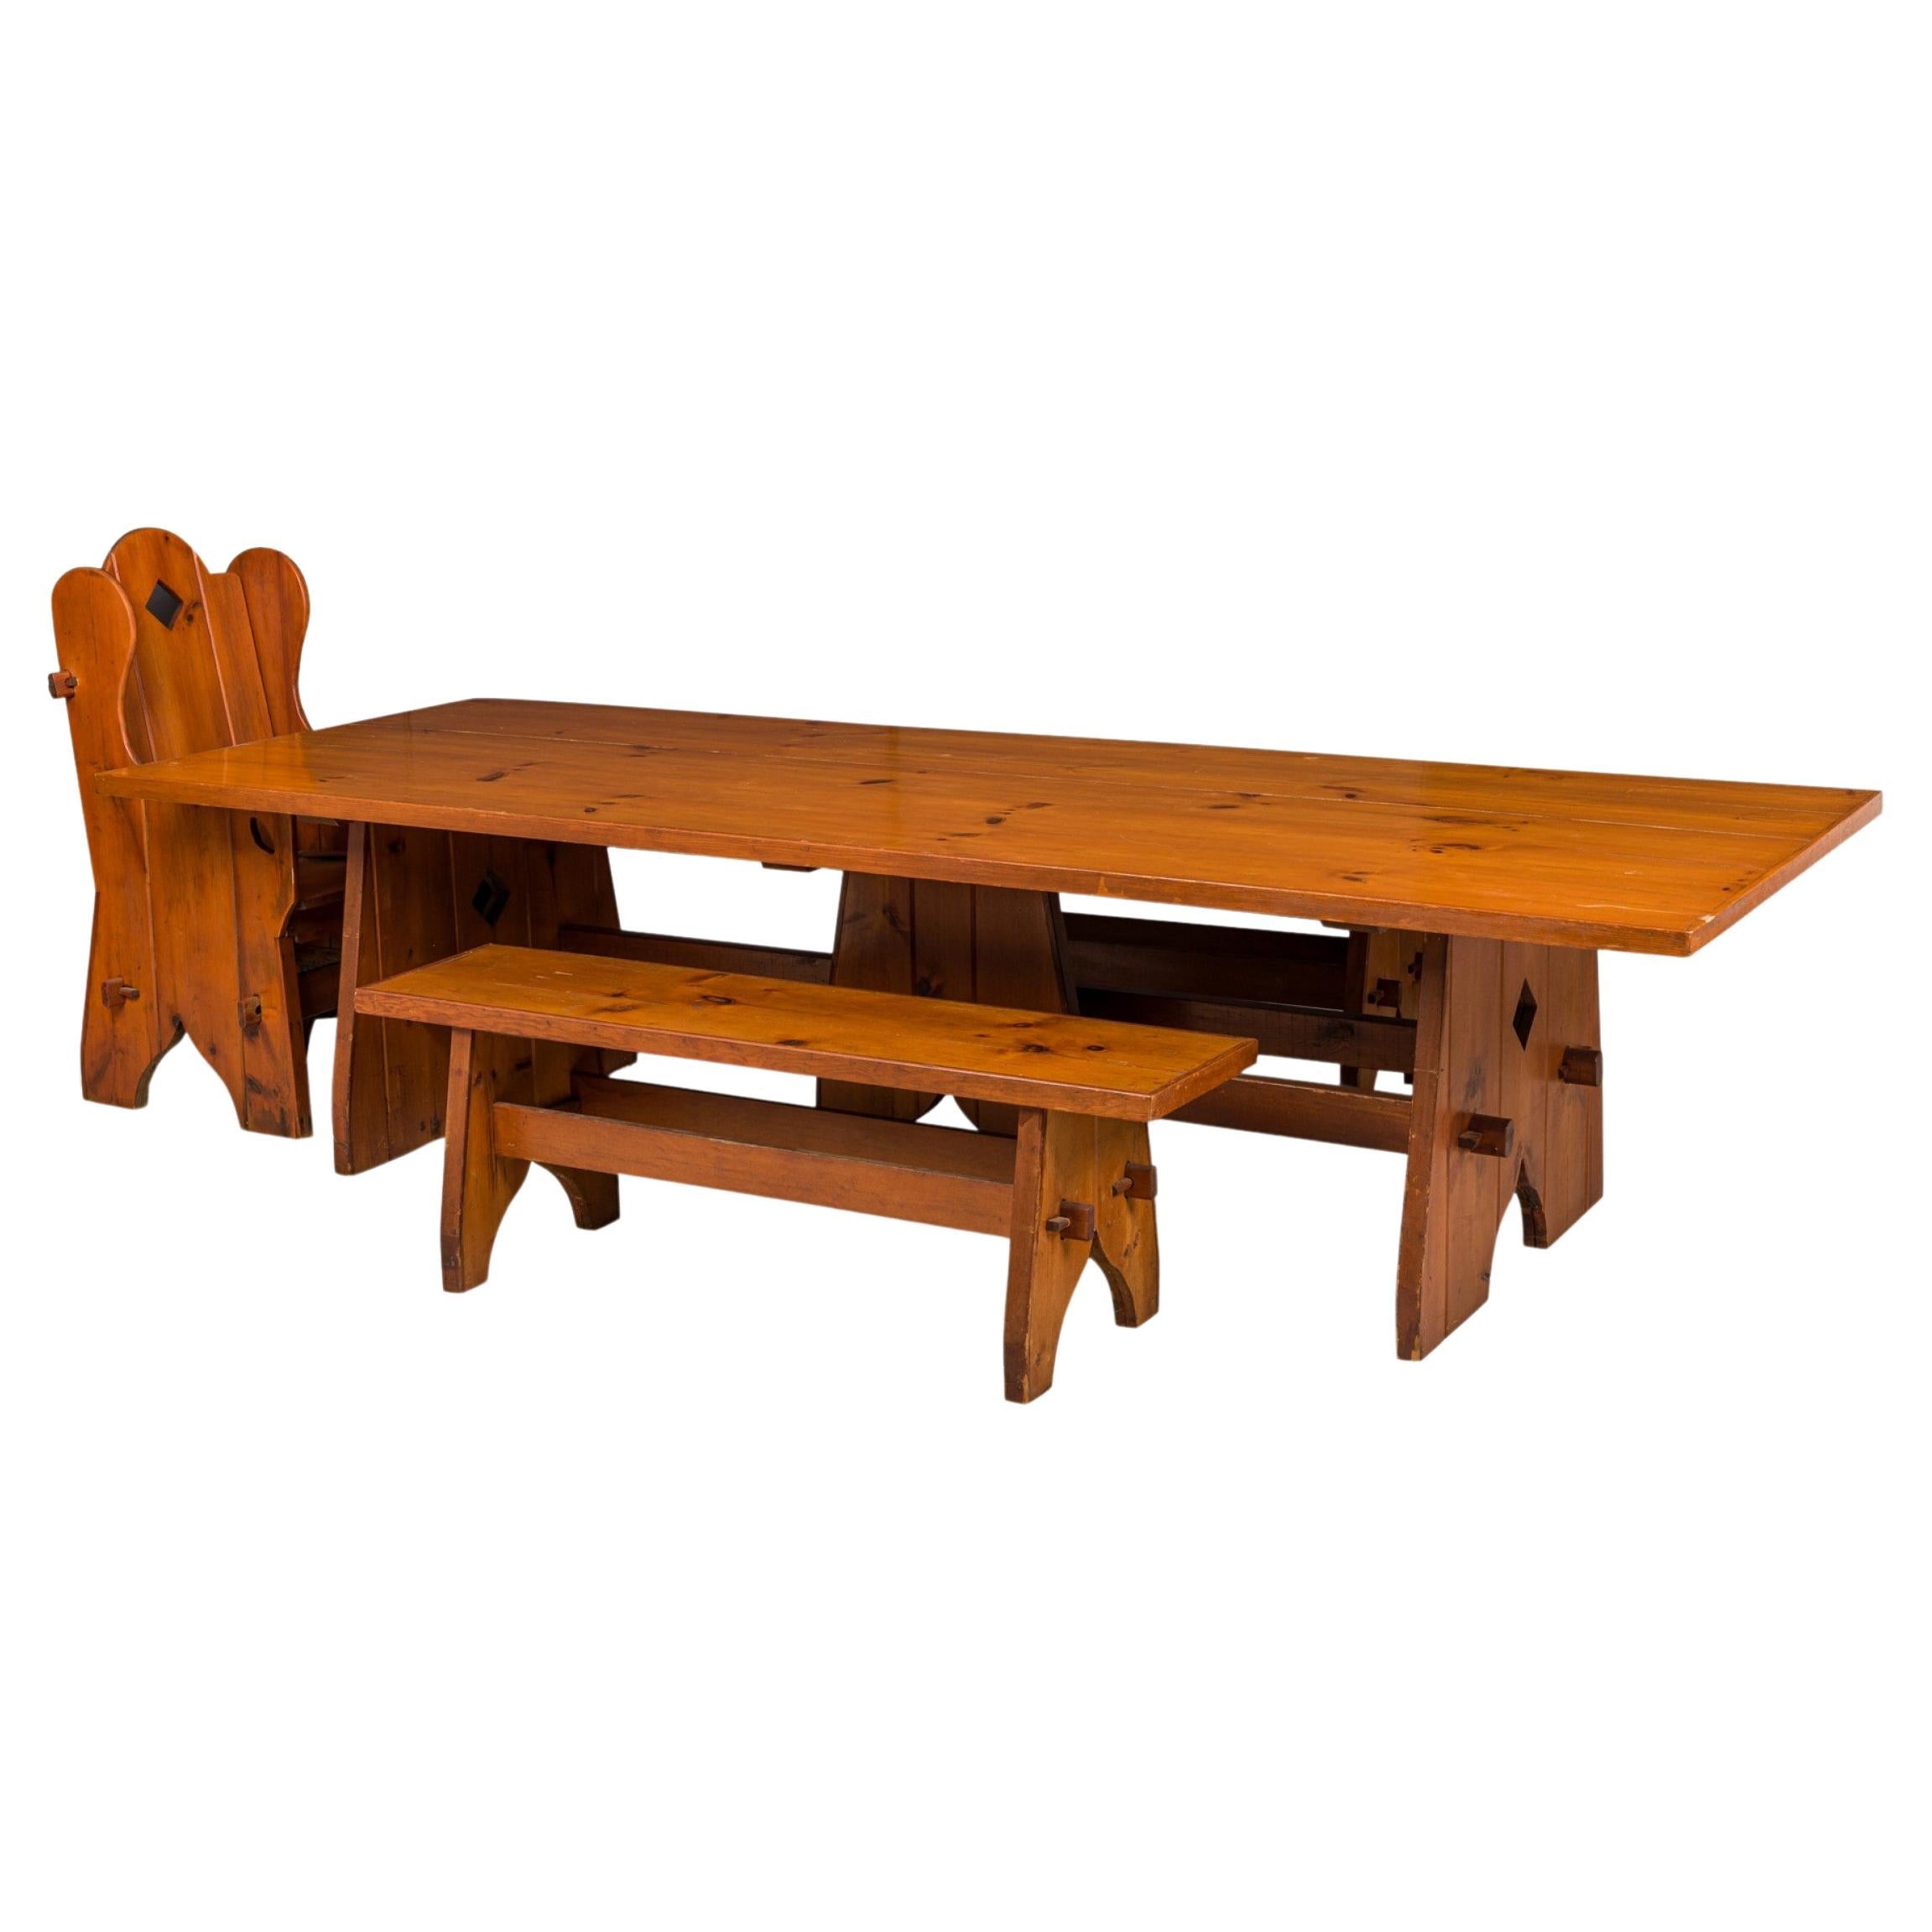 Rustic Adirondack Style Dining Set, Table, Four Benches, One Chair